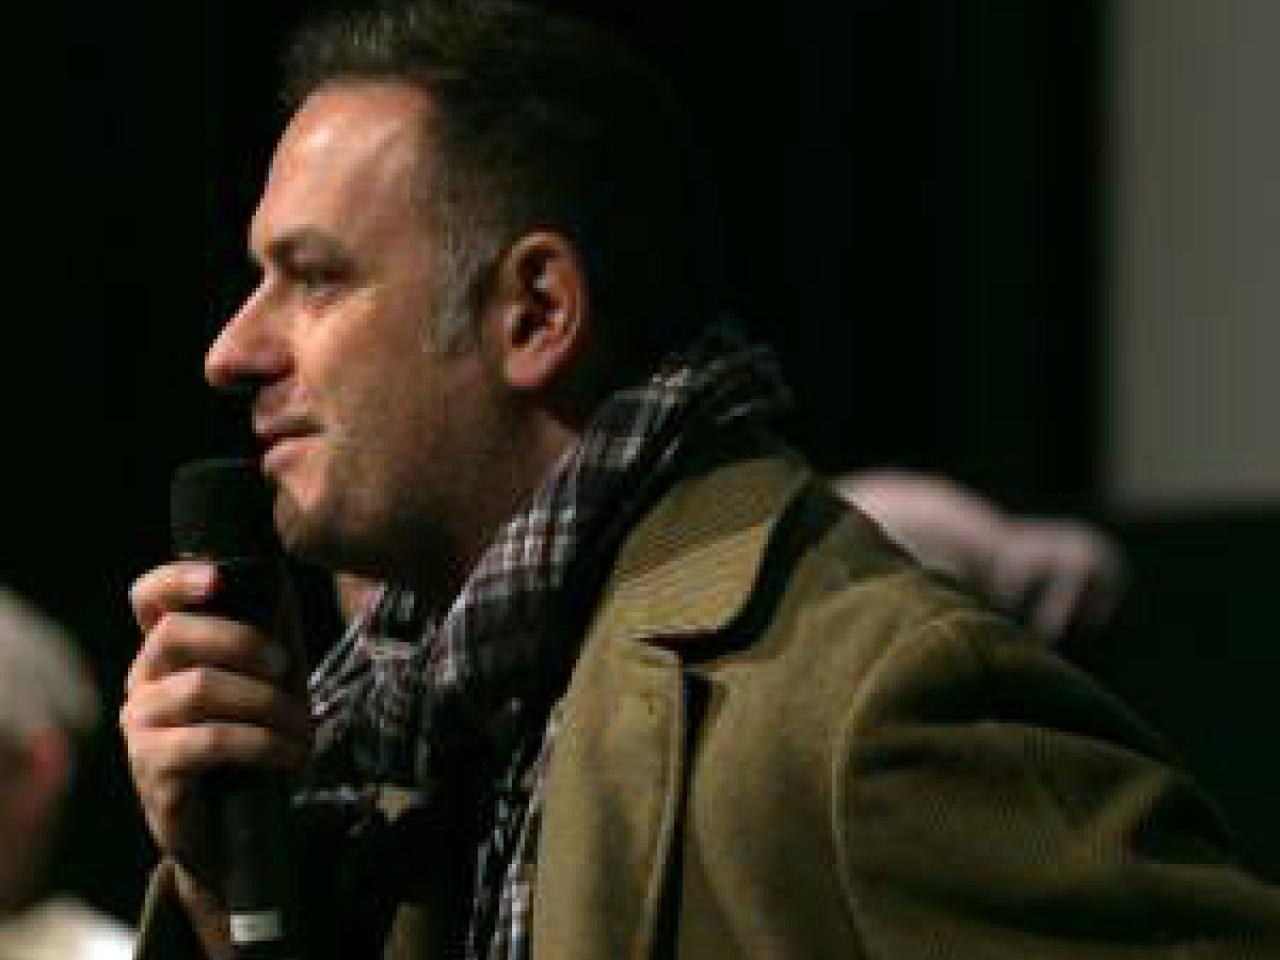 A side shot of New Day filmmaker Jean-Michel Dissard. He wears an olive green jacket and a plaid scarf. He holds a microphone to his mouth with an amused expression on his face.